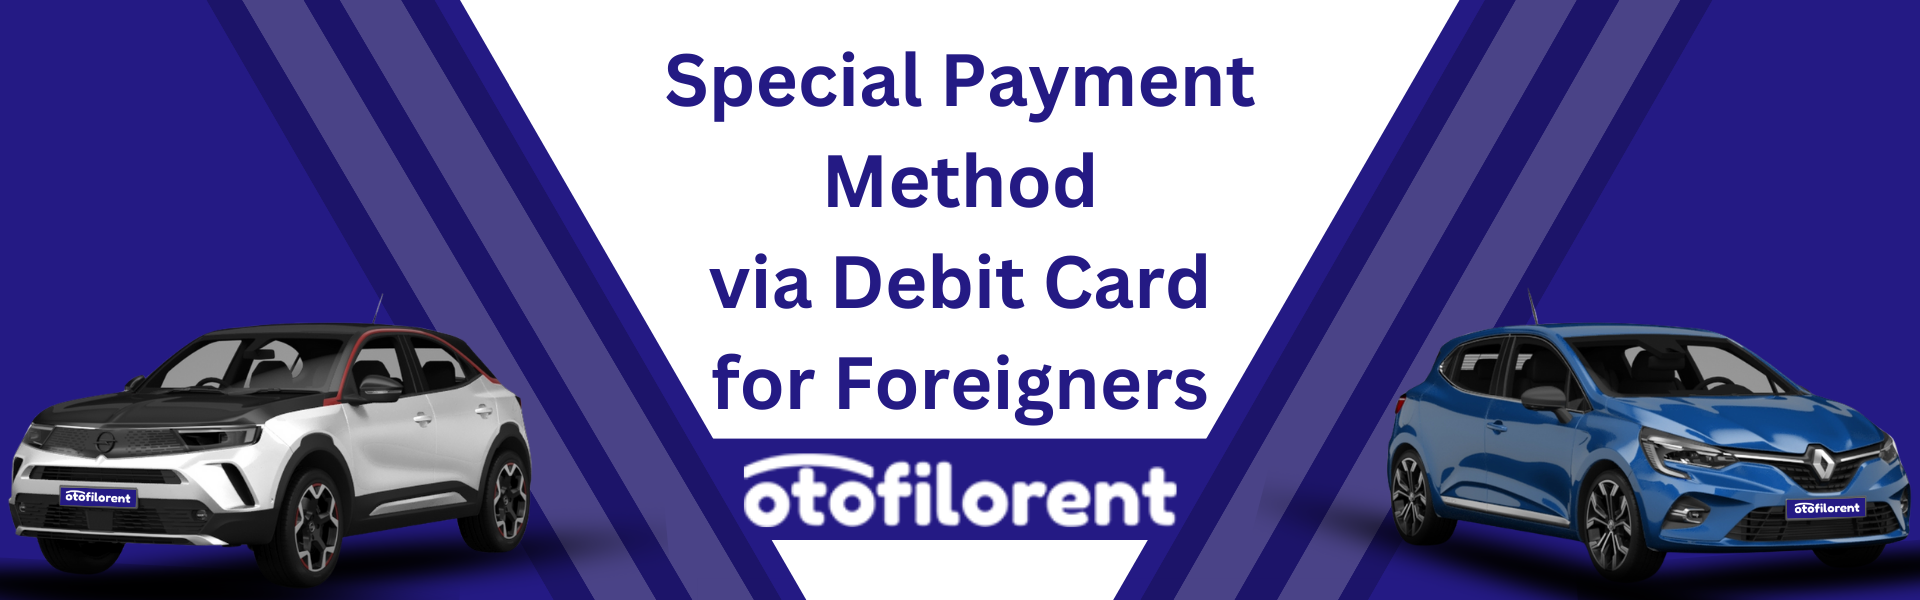 Payment with Debit Card